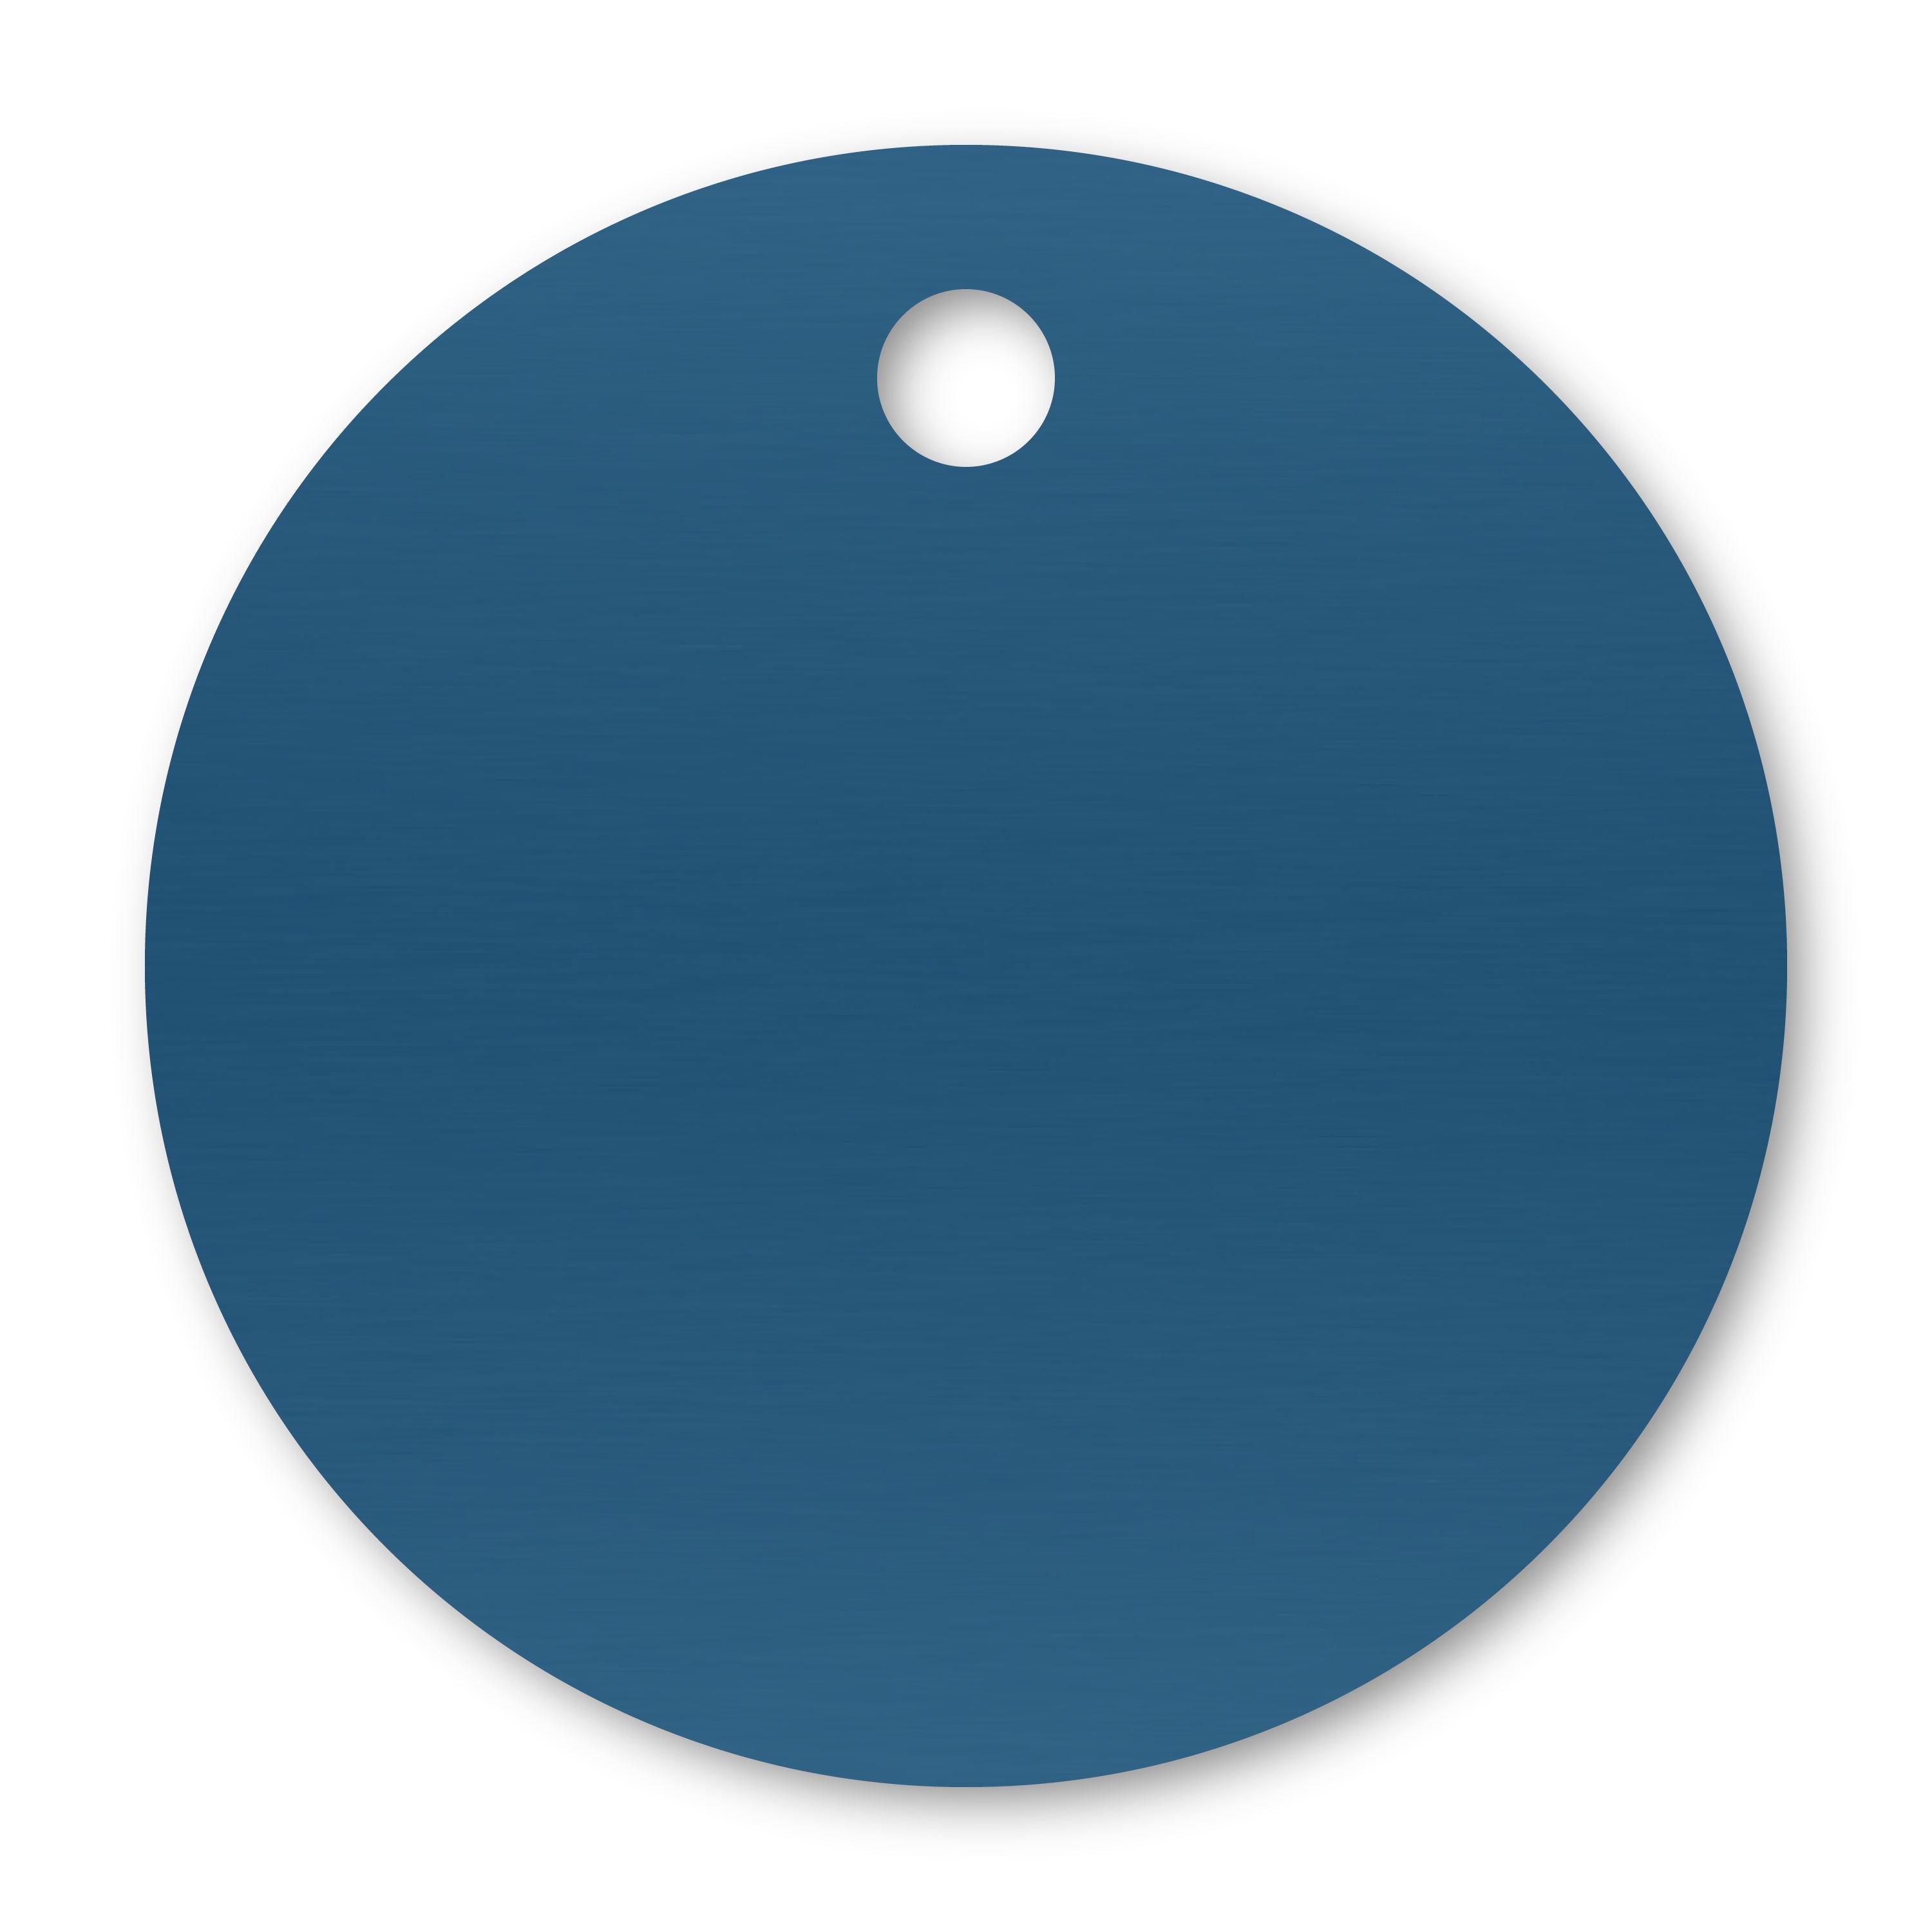 Anodized Aluminum Round Tags, 1-1/2" with 1/8" Hole, Laser Engraved Metal Tags Craftworks NW Blue 